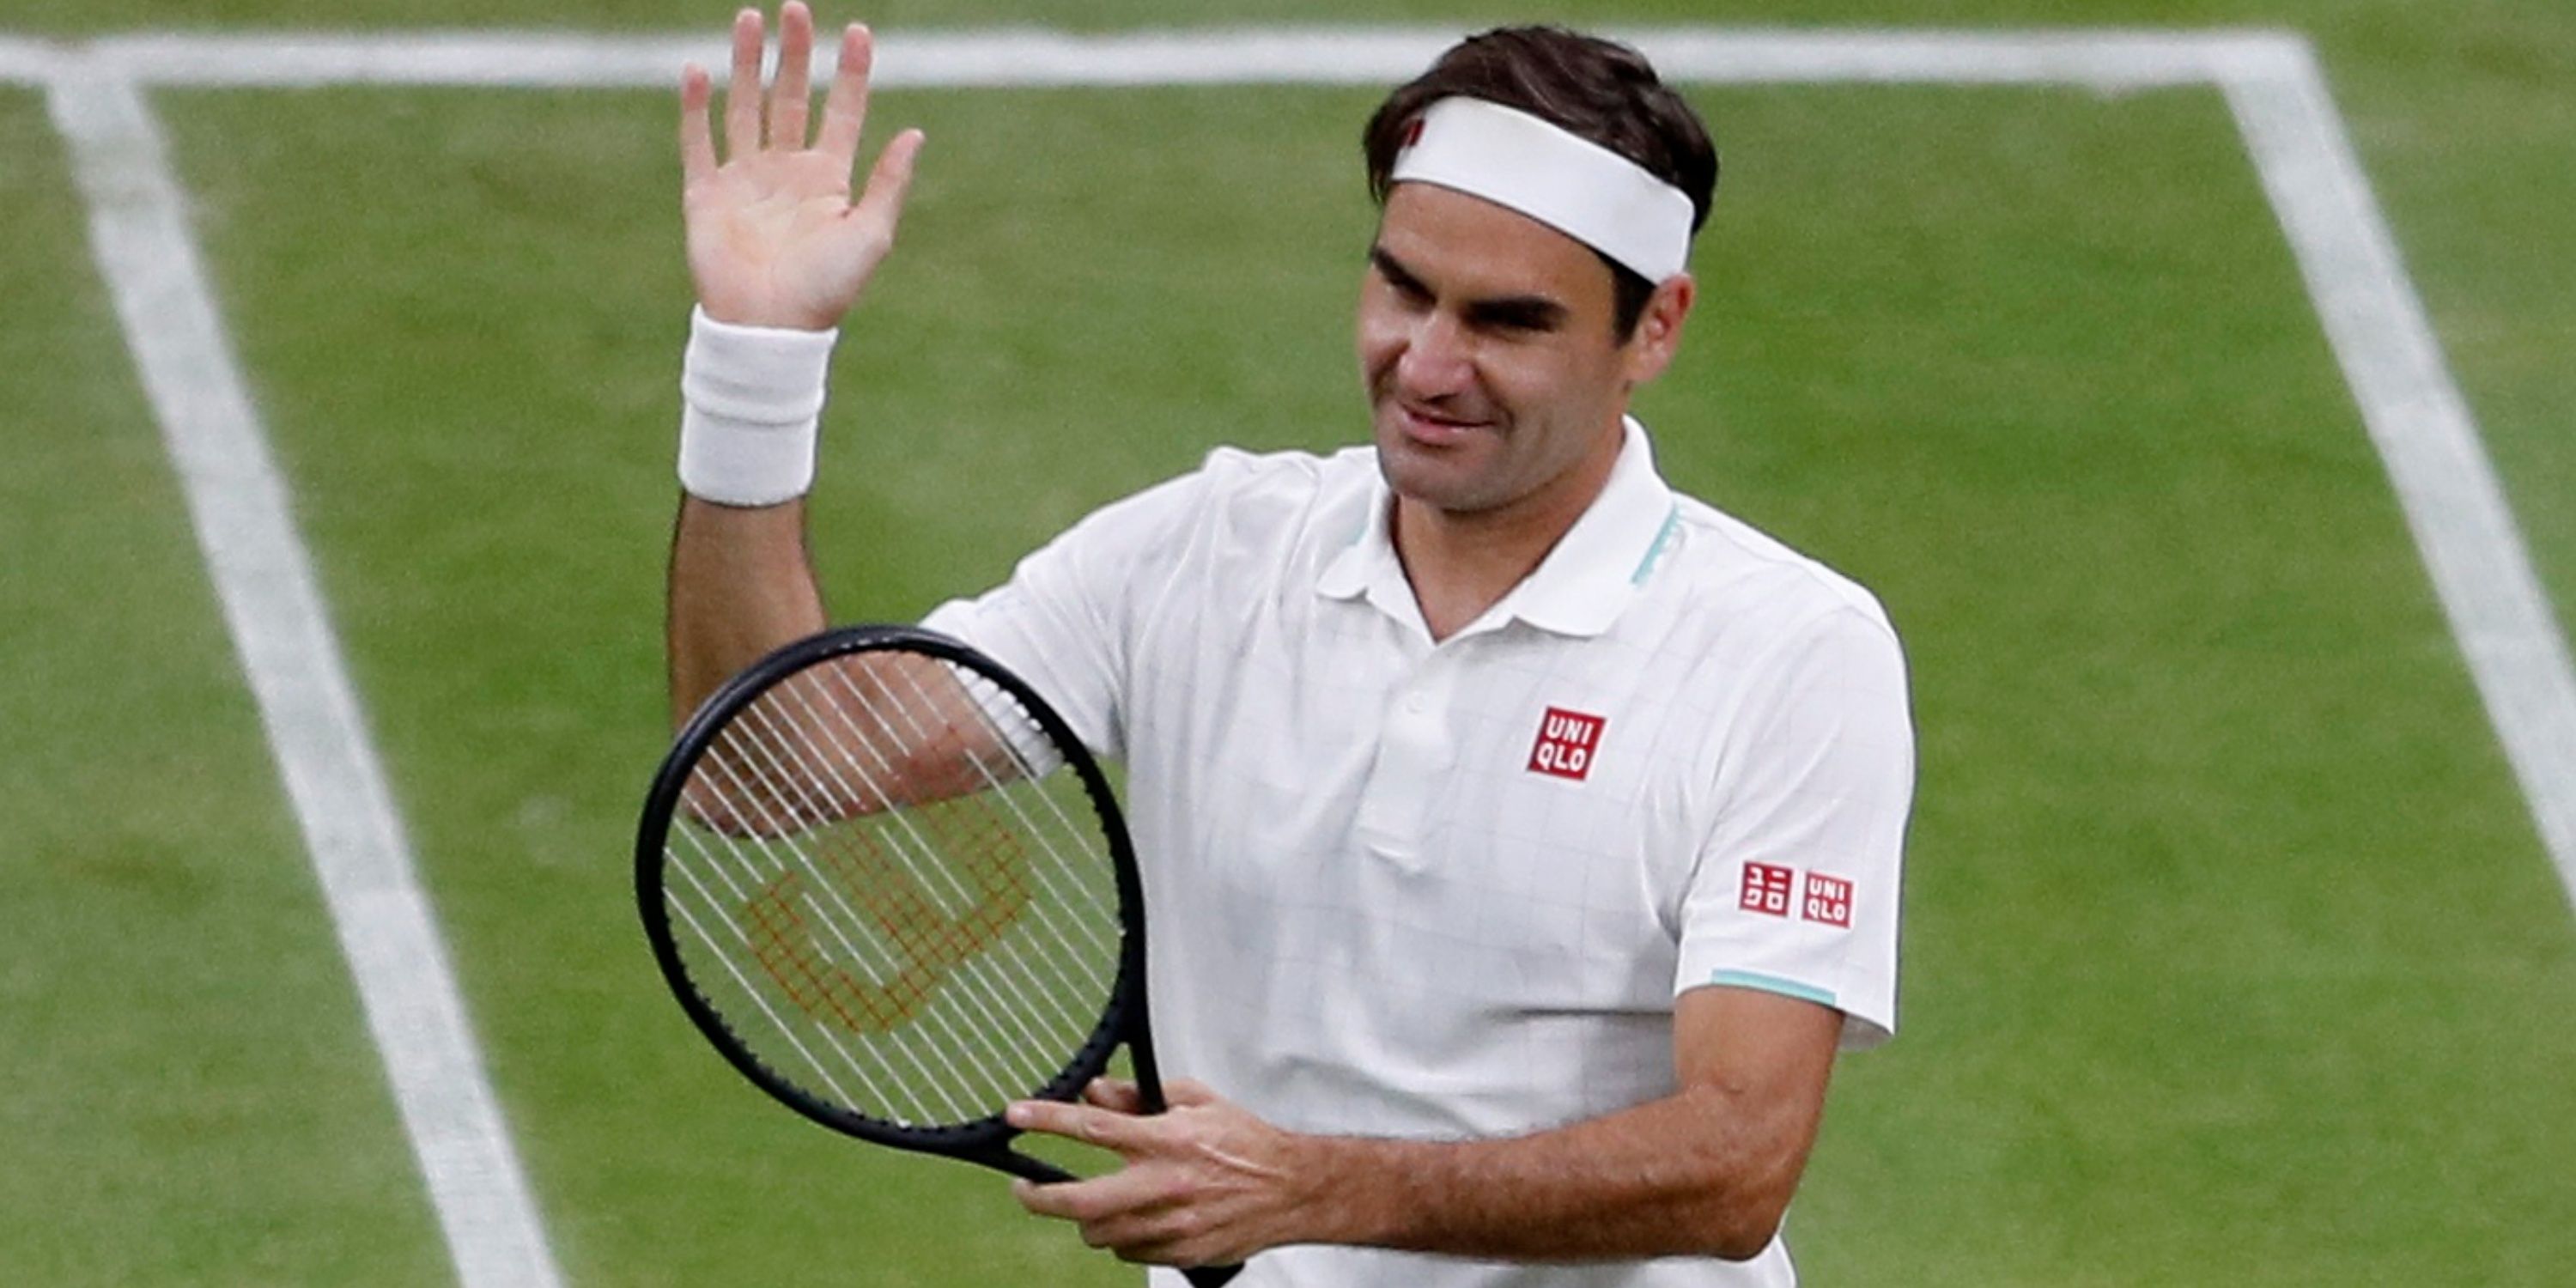 Roger Federer waves to the crowd.